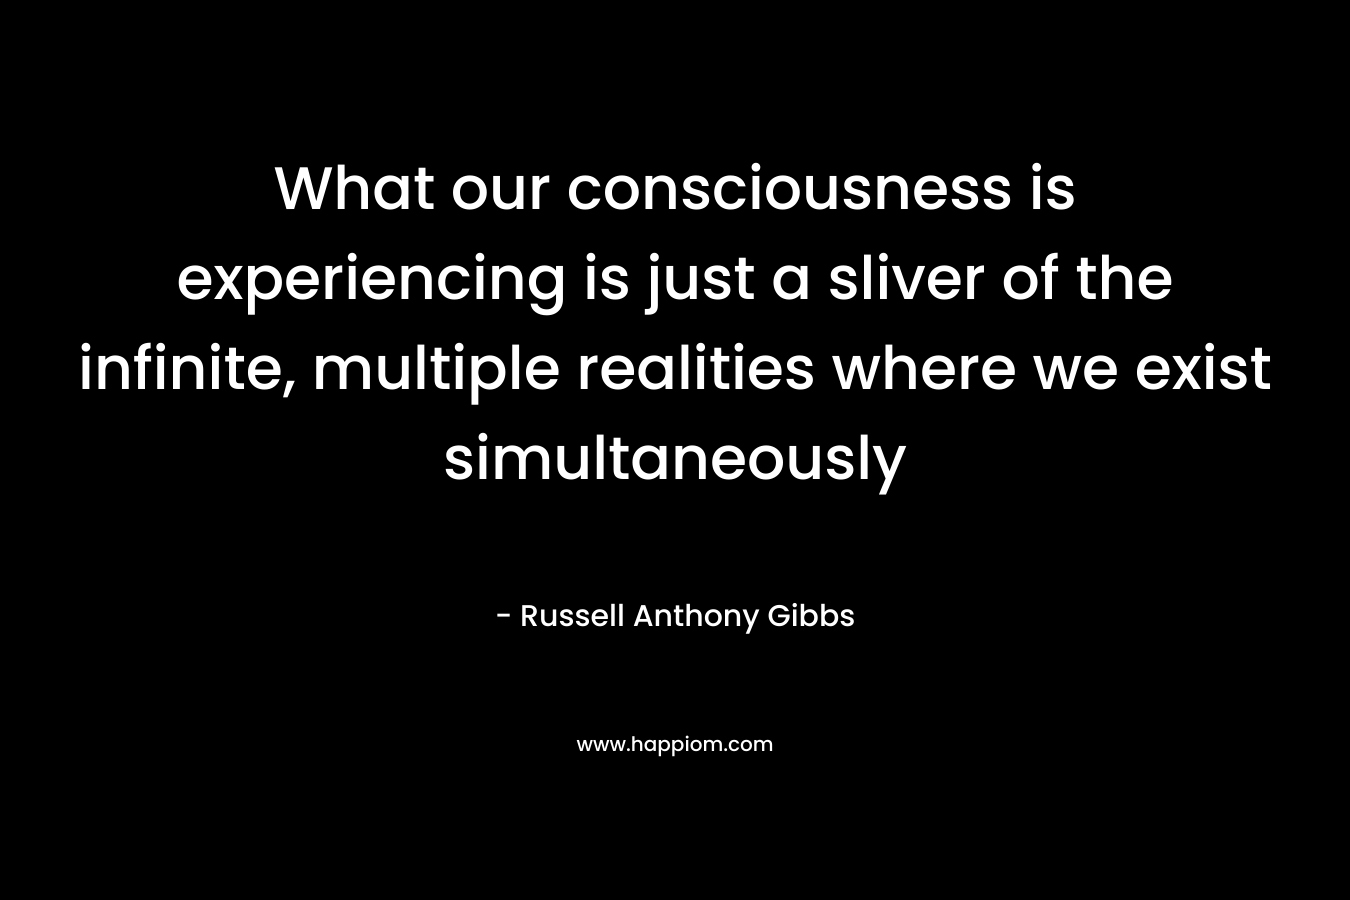 What our consciousness is experiencing is just a sliver of the infinite, multiple realities where we exist simultaneously – Russell Anthony Gibbs